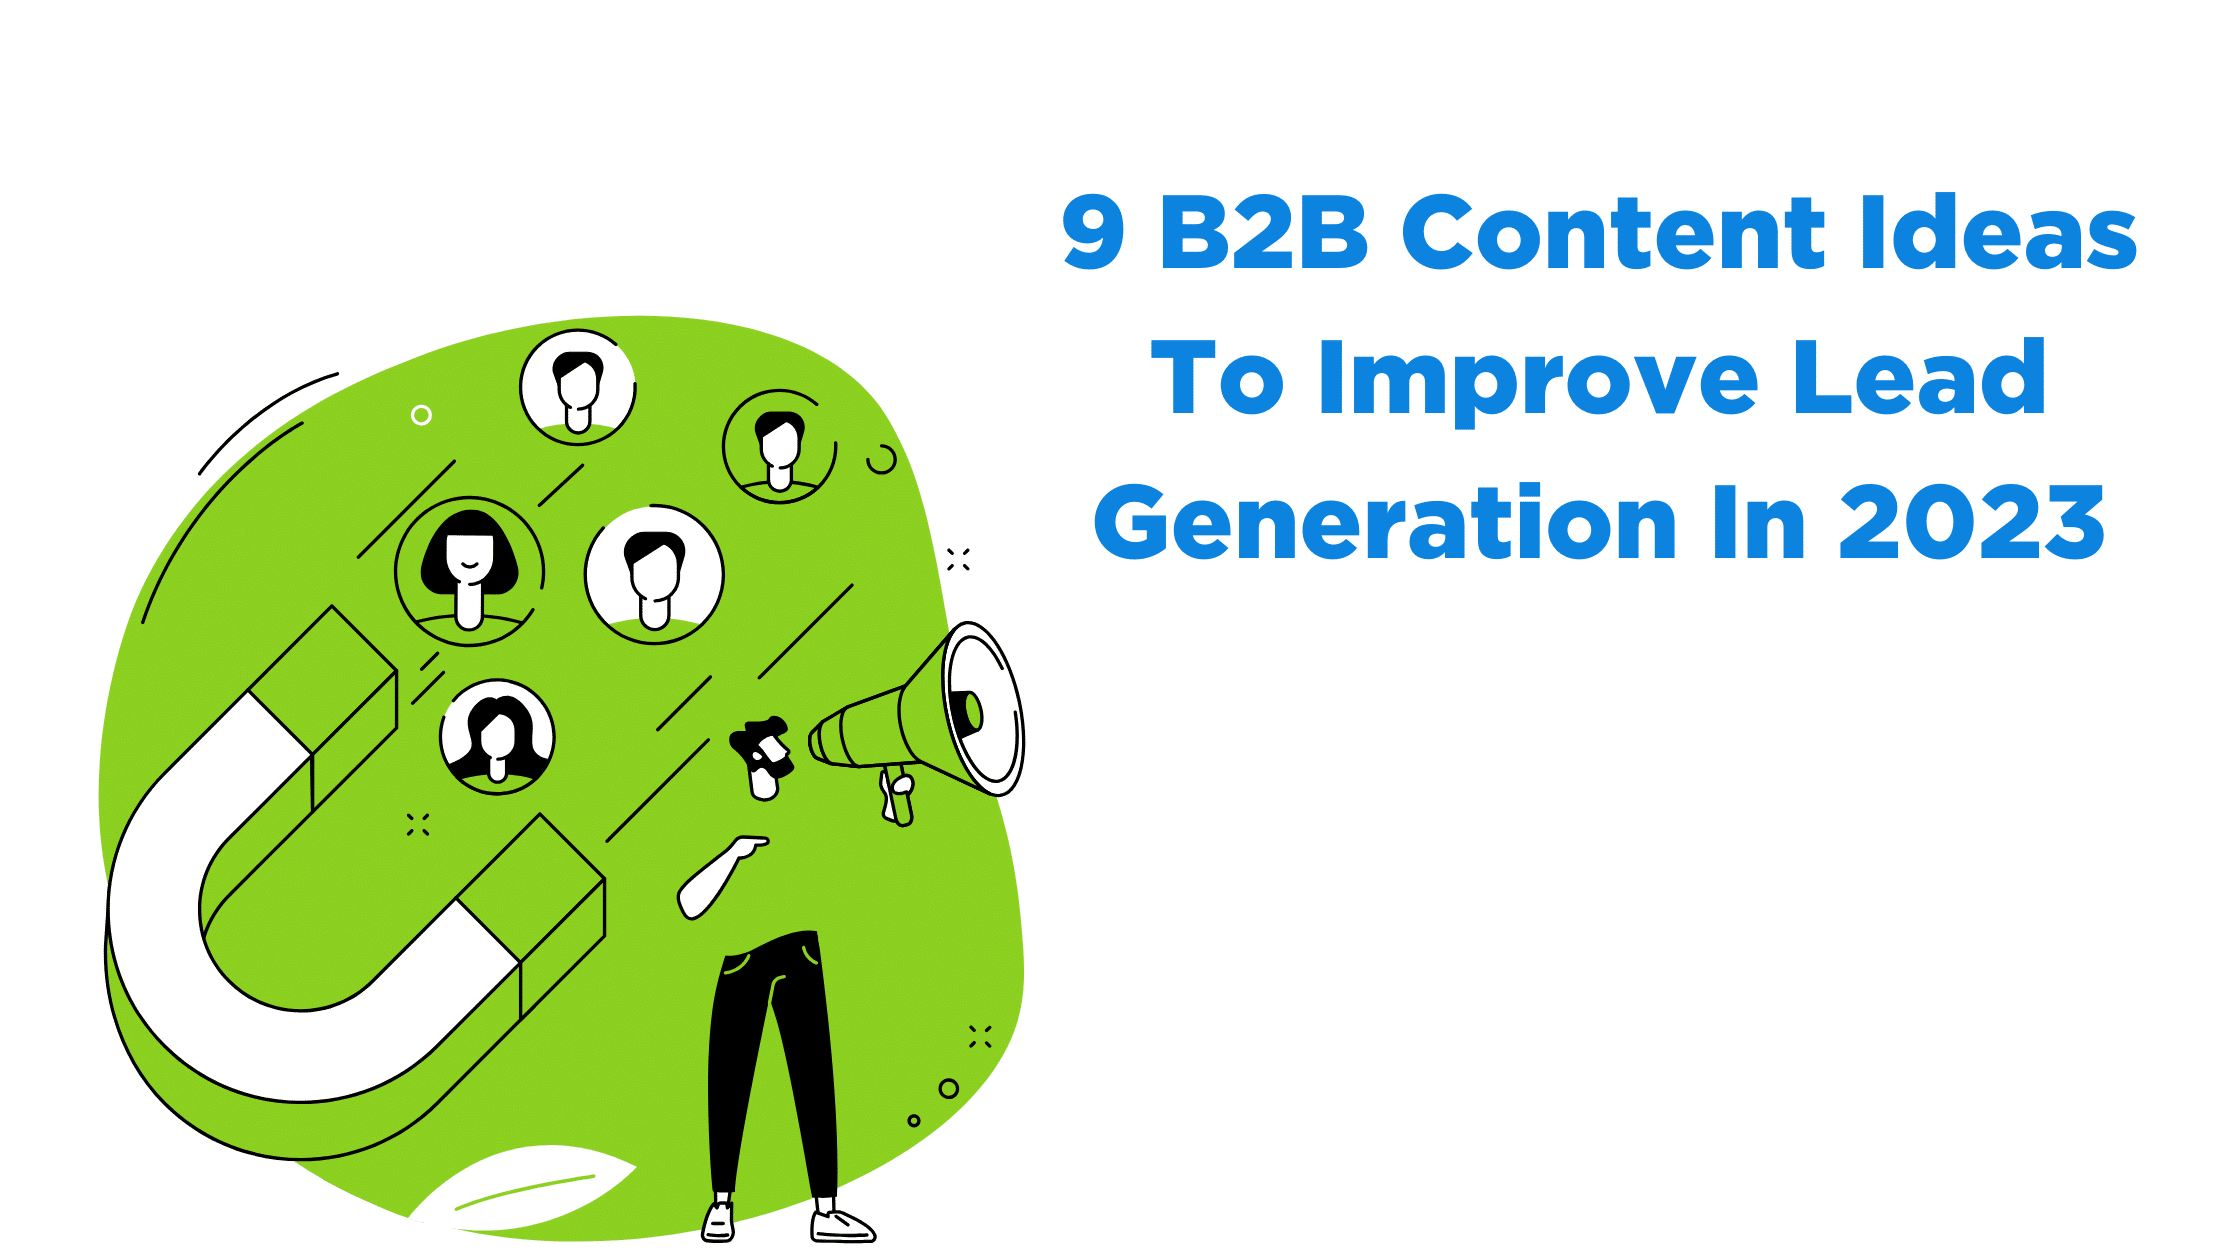 9 B2B Content Ideas To Improve Lead Generation In 2023